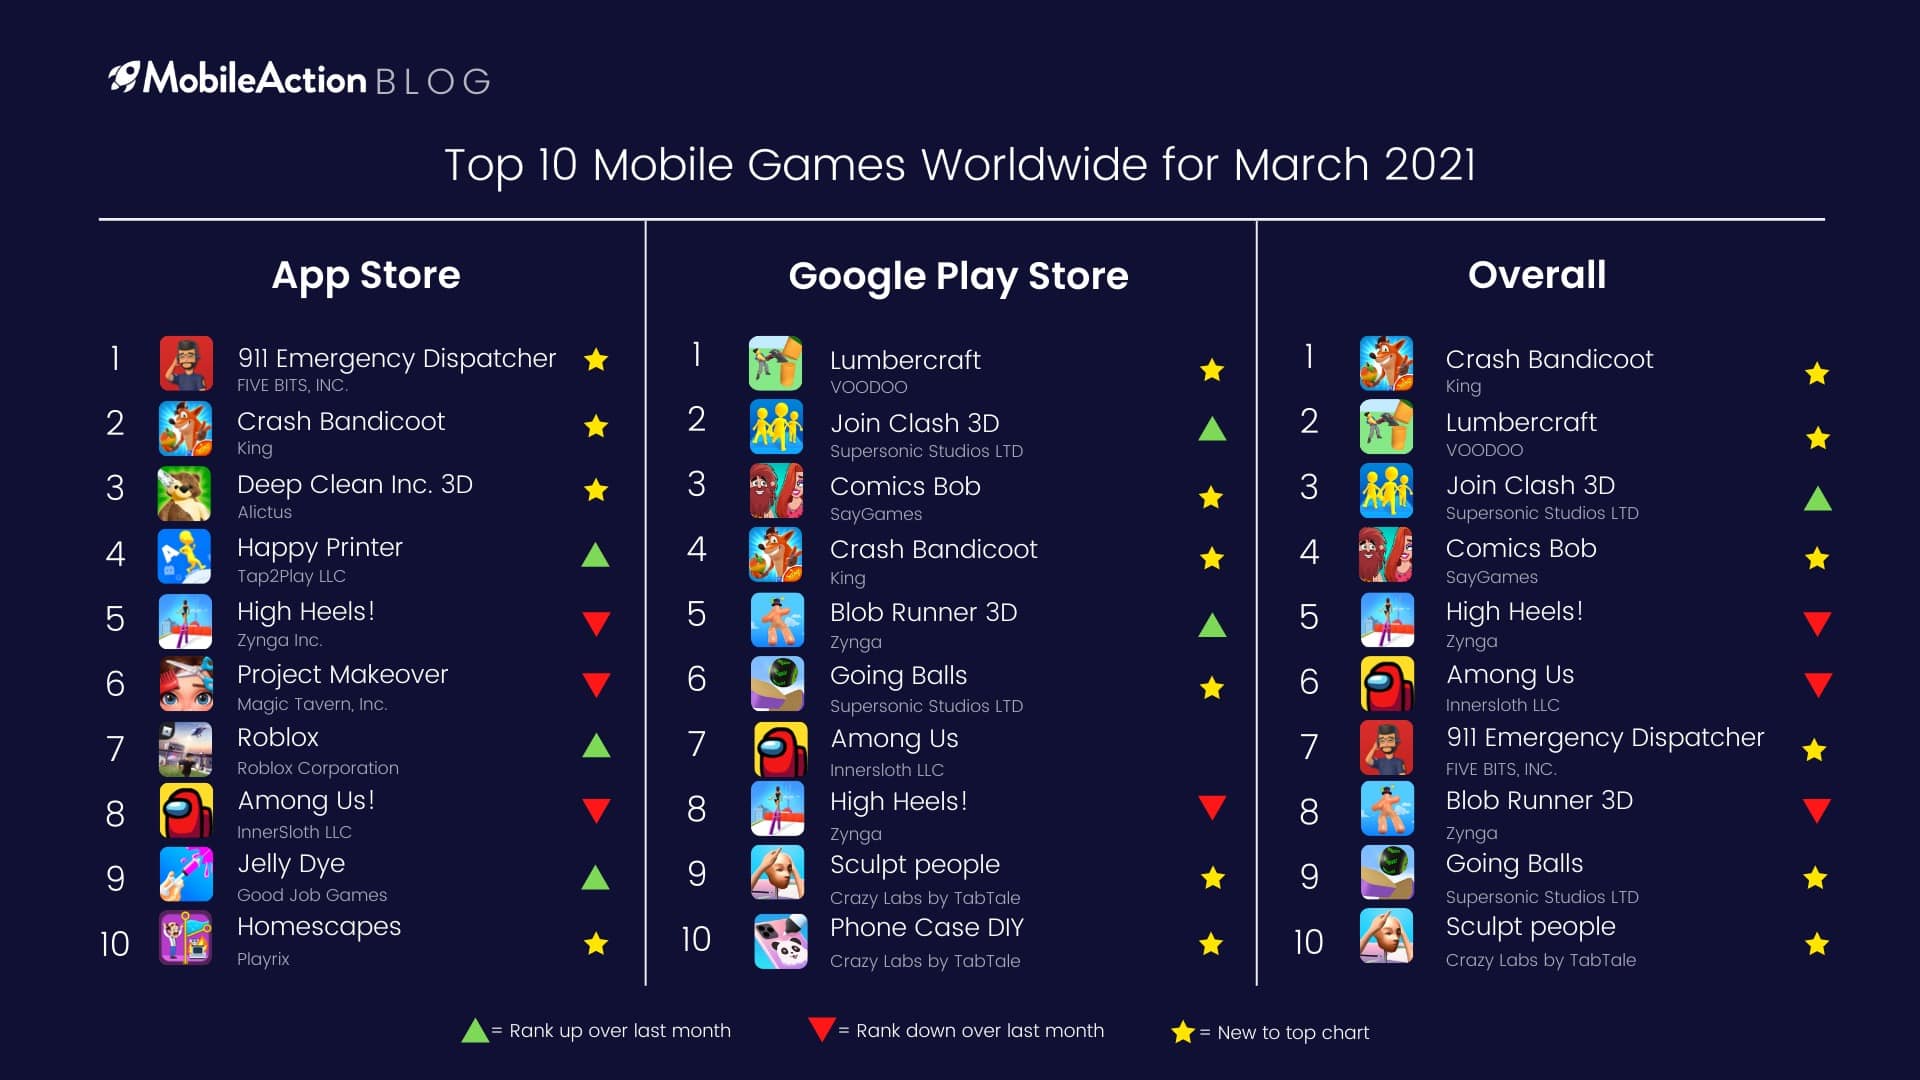 Top 10 Mobile Games Worldwide for March 2021